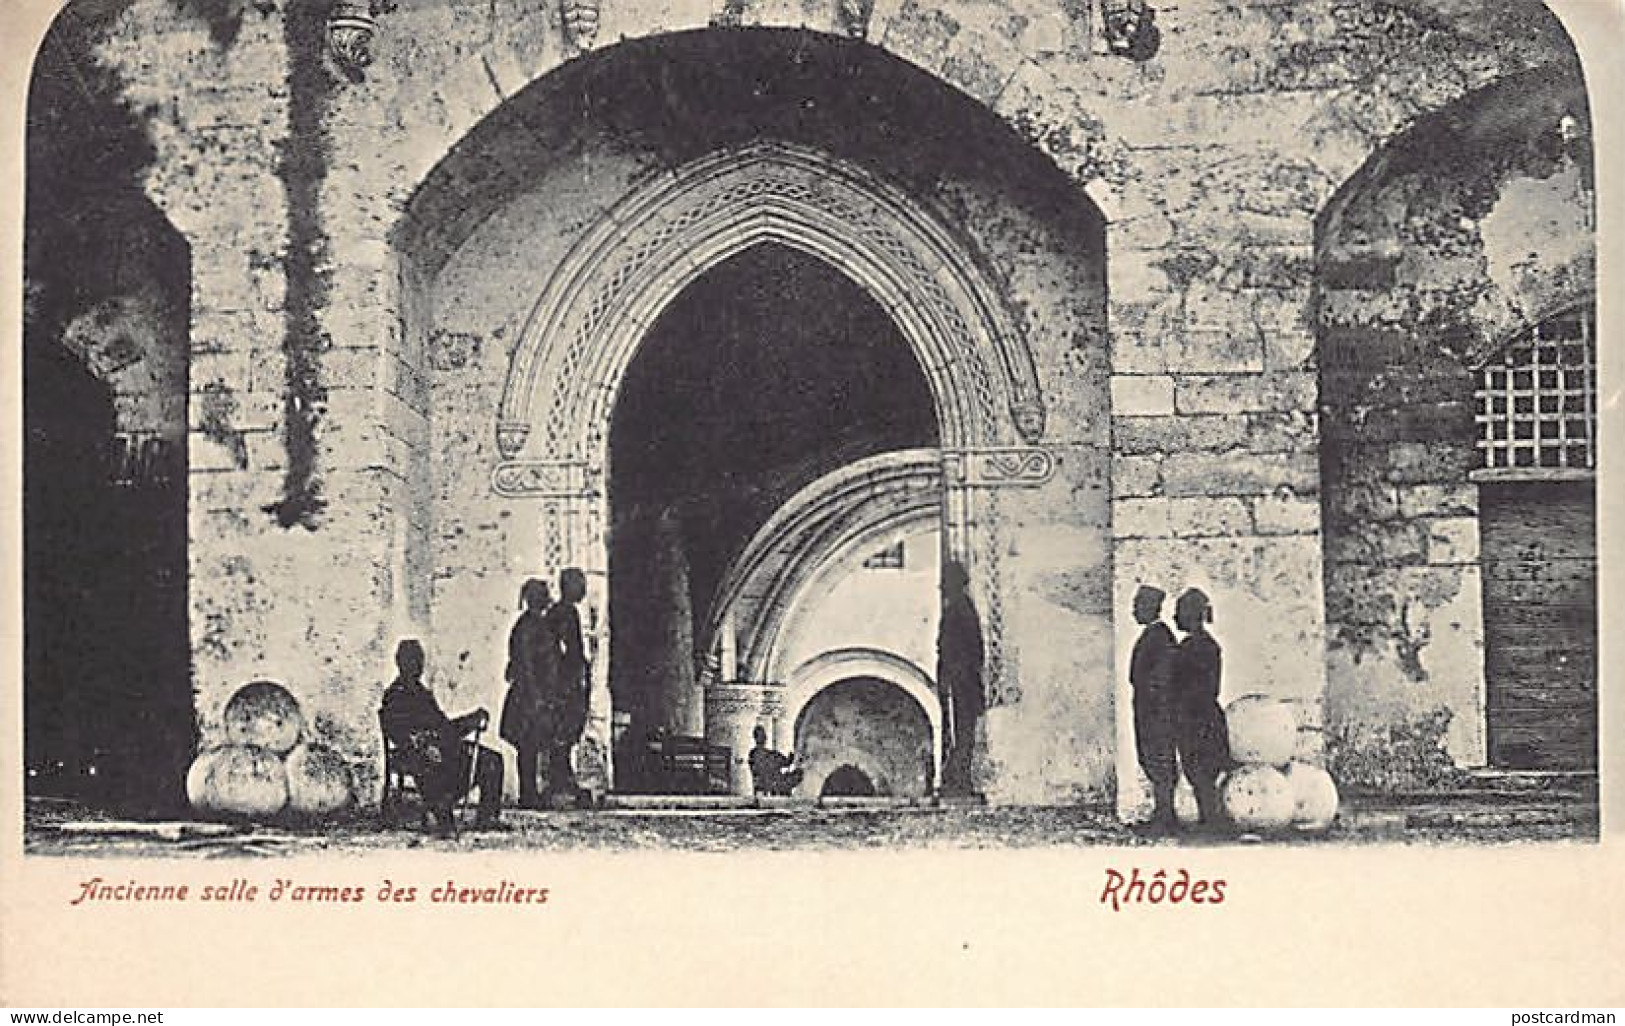 Greece - RHODES - Former Knights' Armory - Publ. Unknown  - Greece